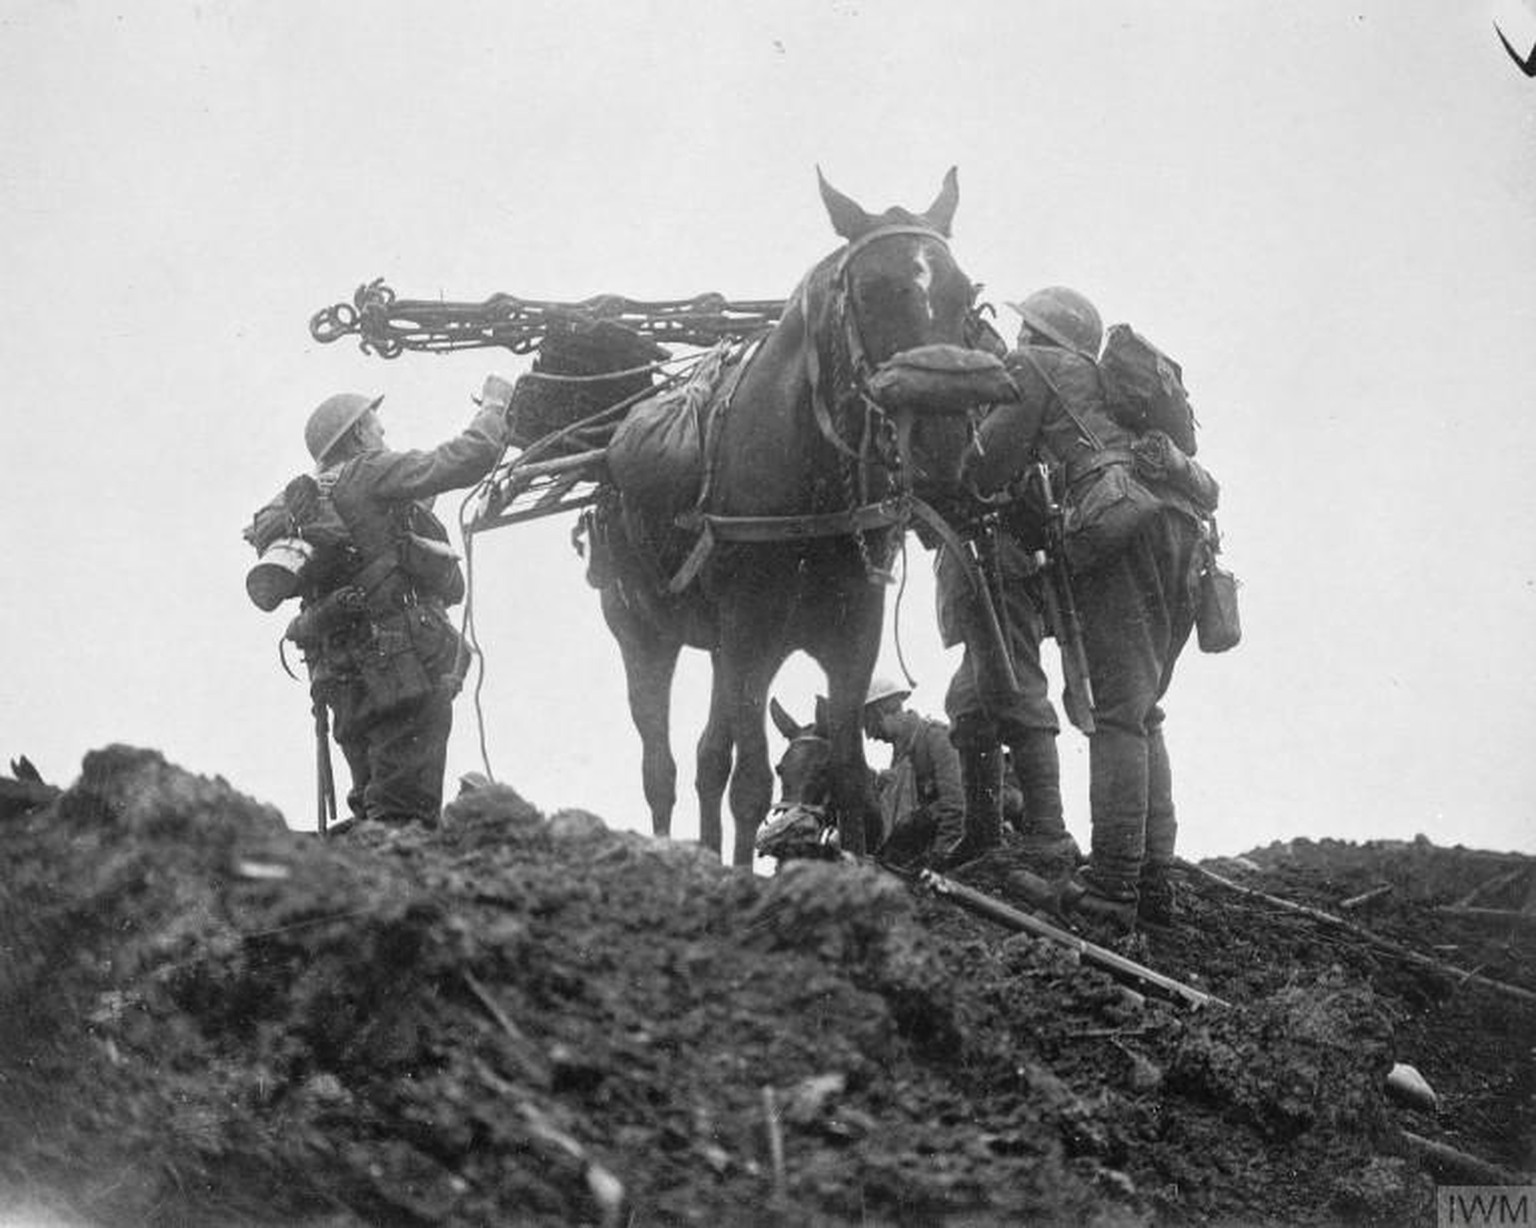 A pack horse with a gas mask is loaded up with equipment during the Battle of Pilckem Ridge, Belgium, 31 July 1917.
https://www.iwm.org.uk/collections/item/object/205193369